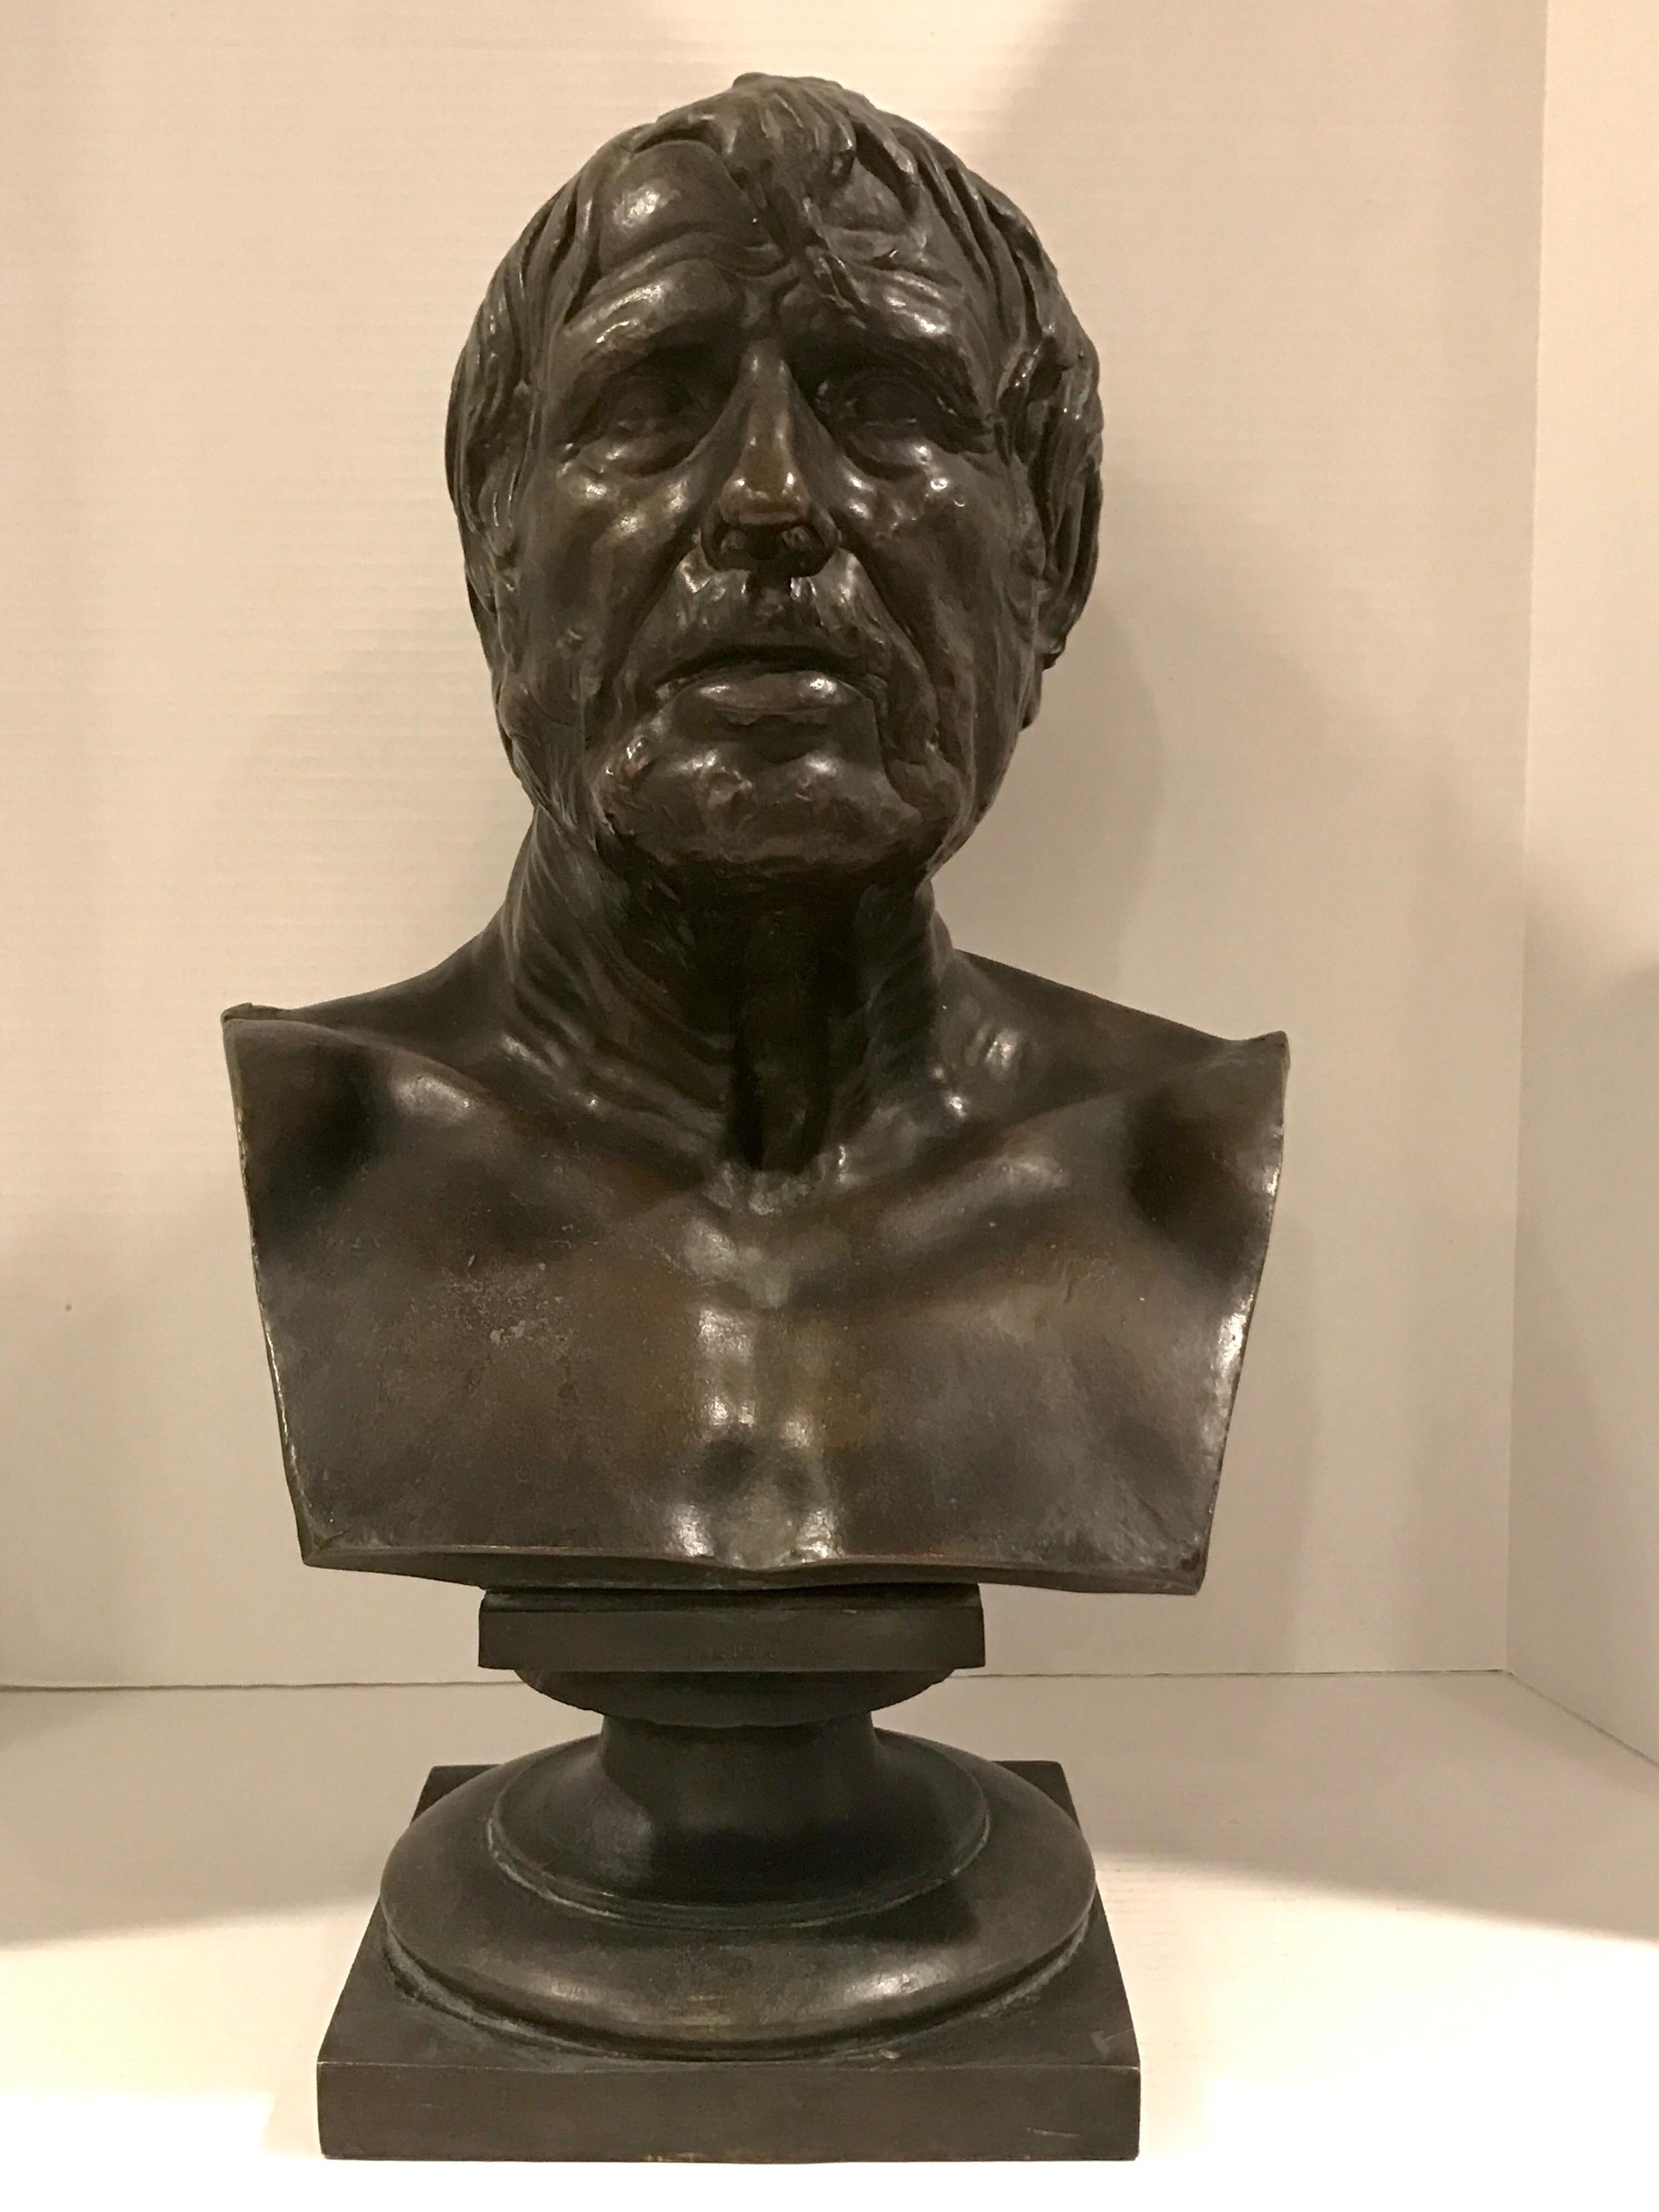 Grand tour bronze portrait bust of Seneca, titled on the front Seneca, Exceptional quality. Foundry marked and Dated 